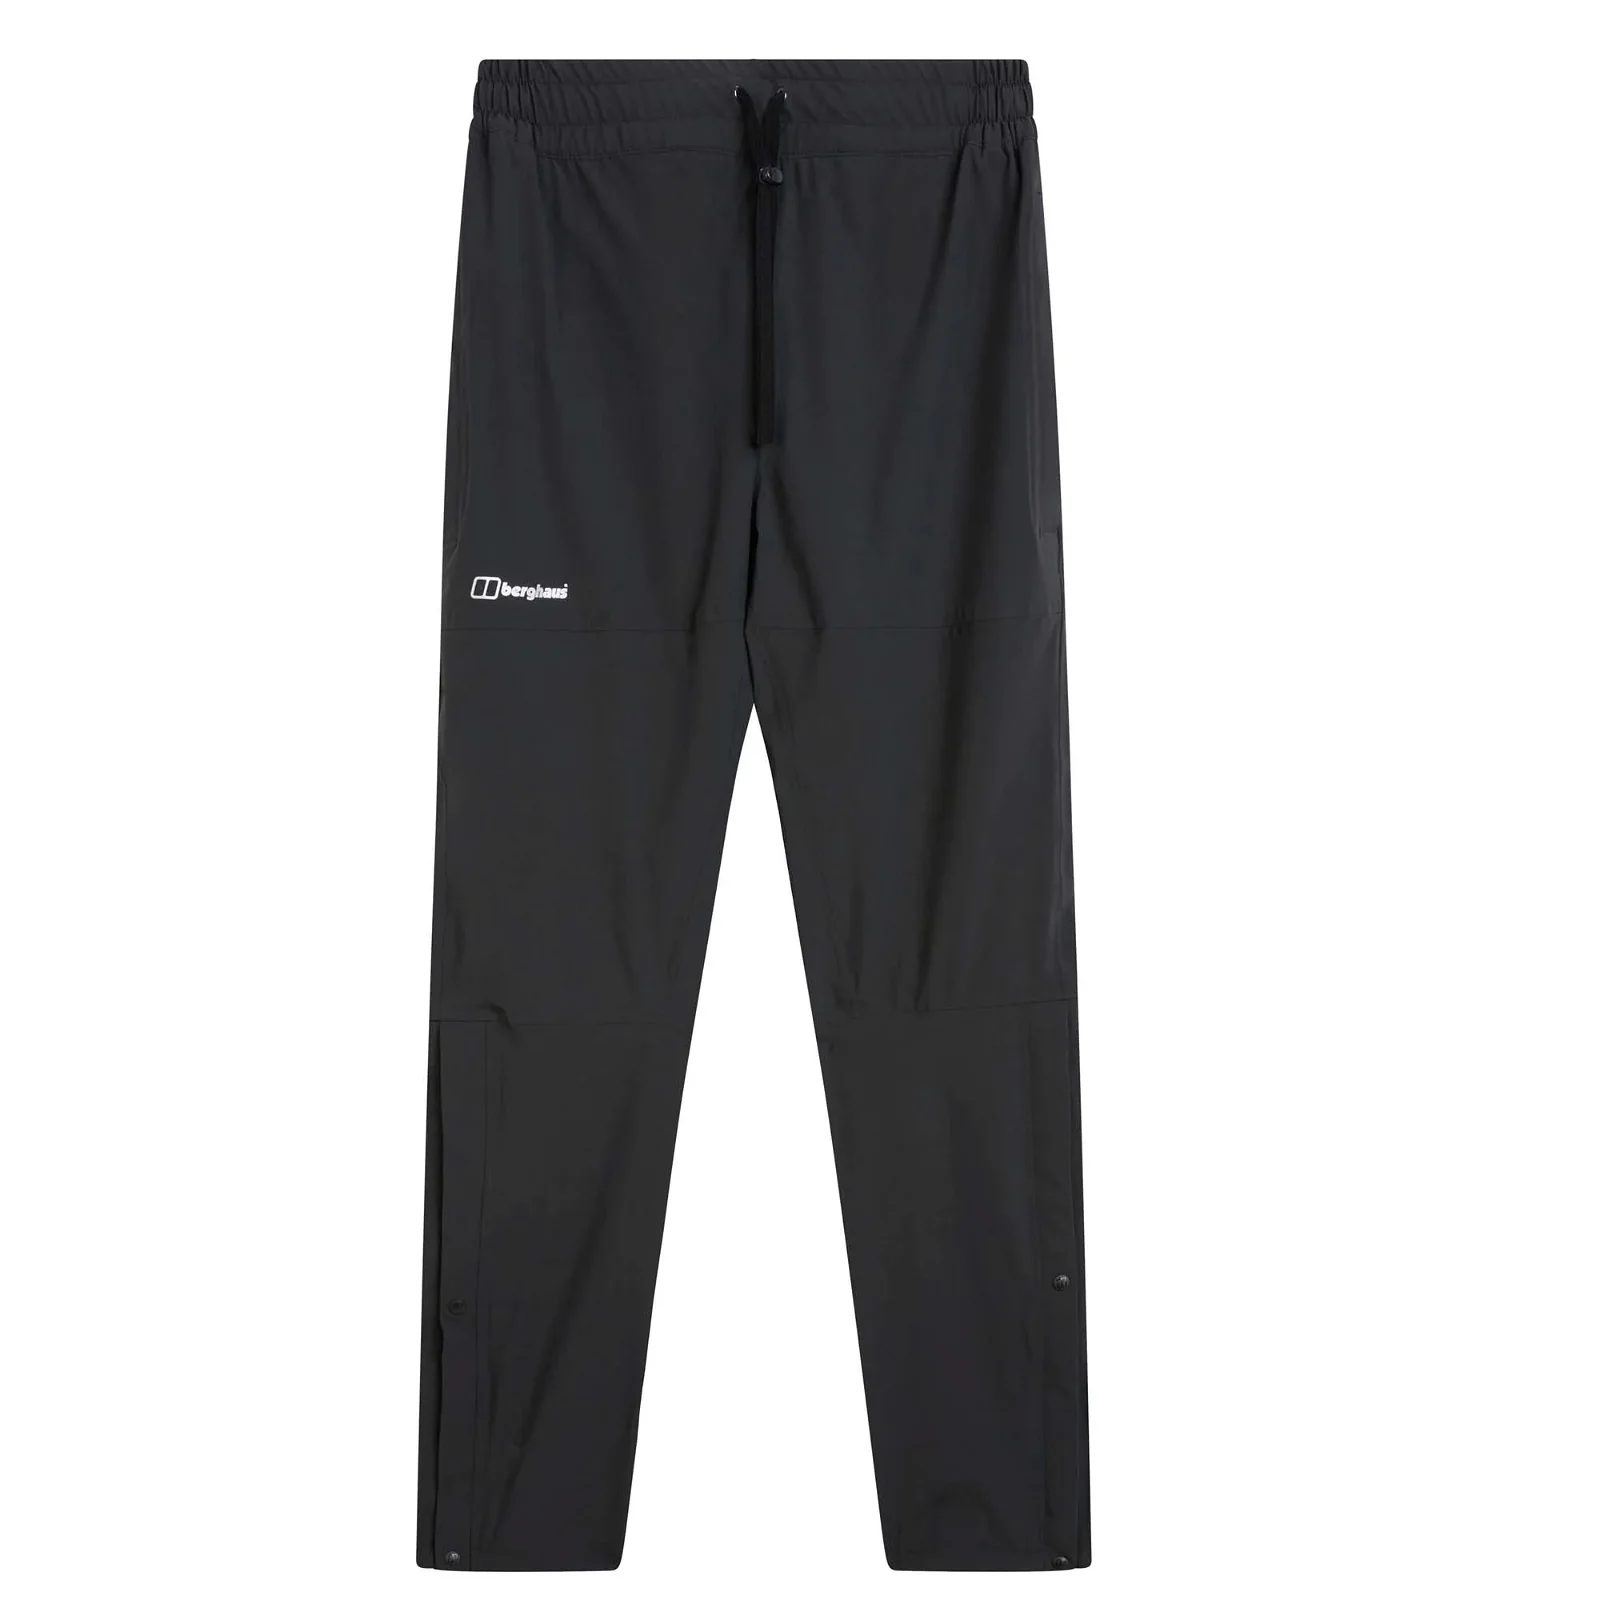 Image of Berghaus Alluvion Waterproof Womens Overtrouser Pant